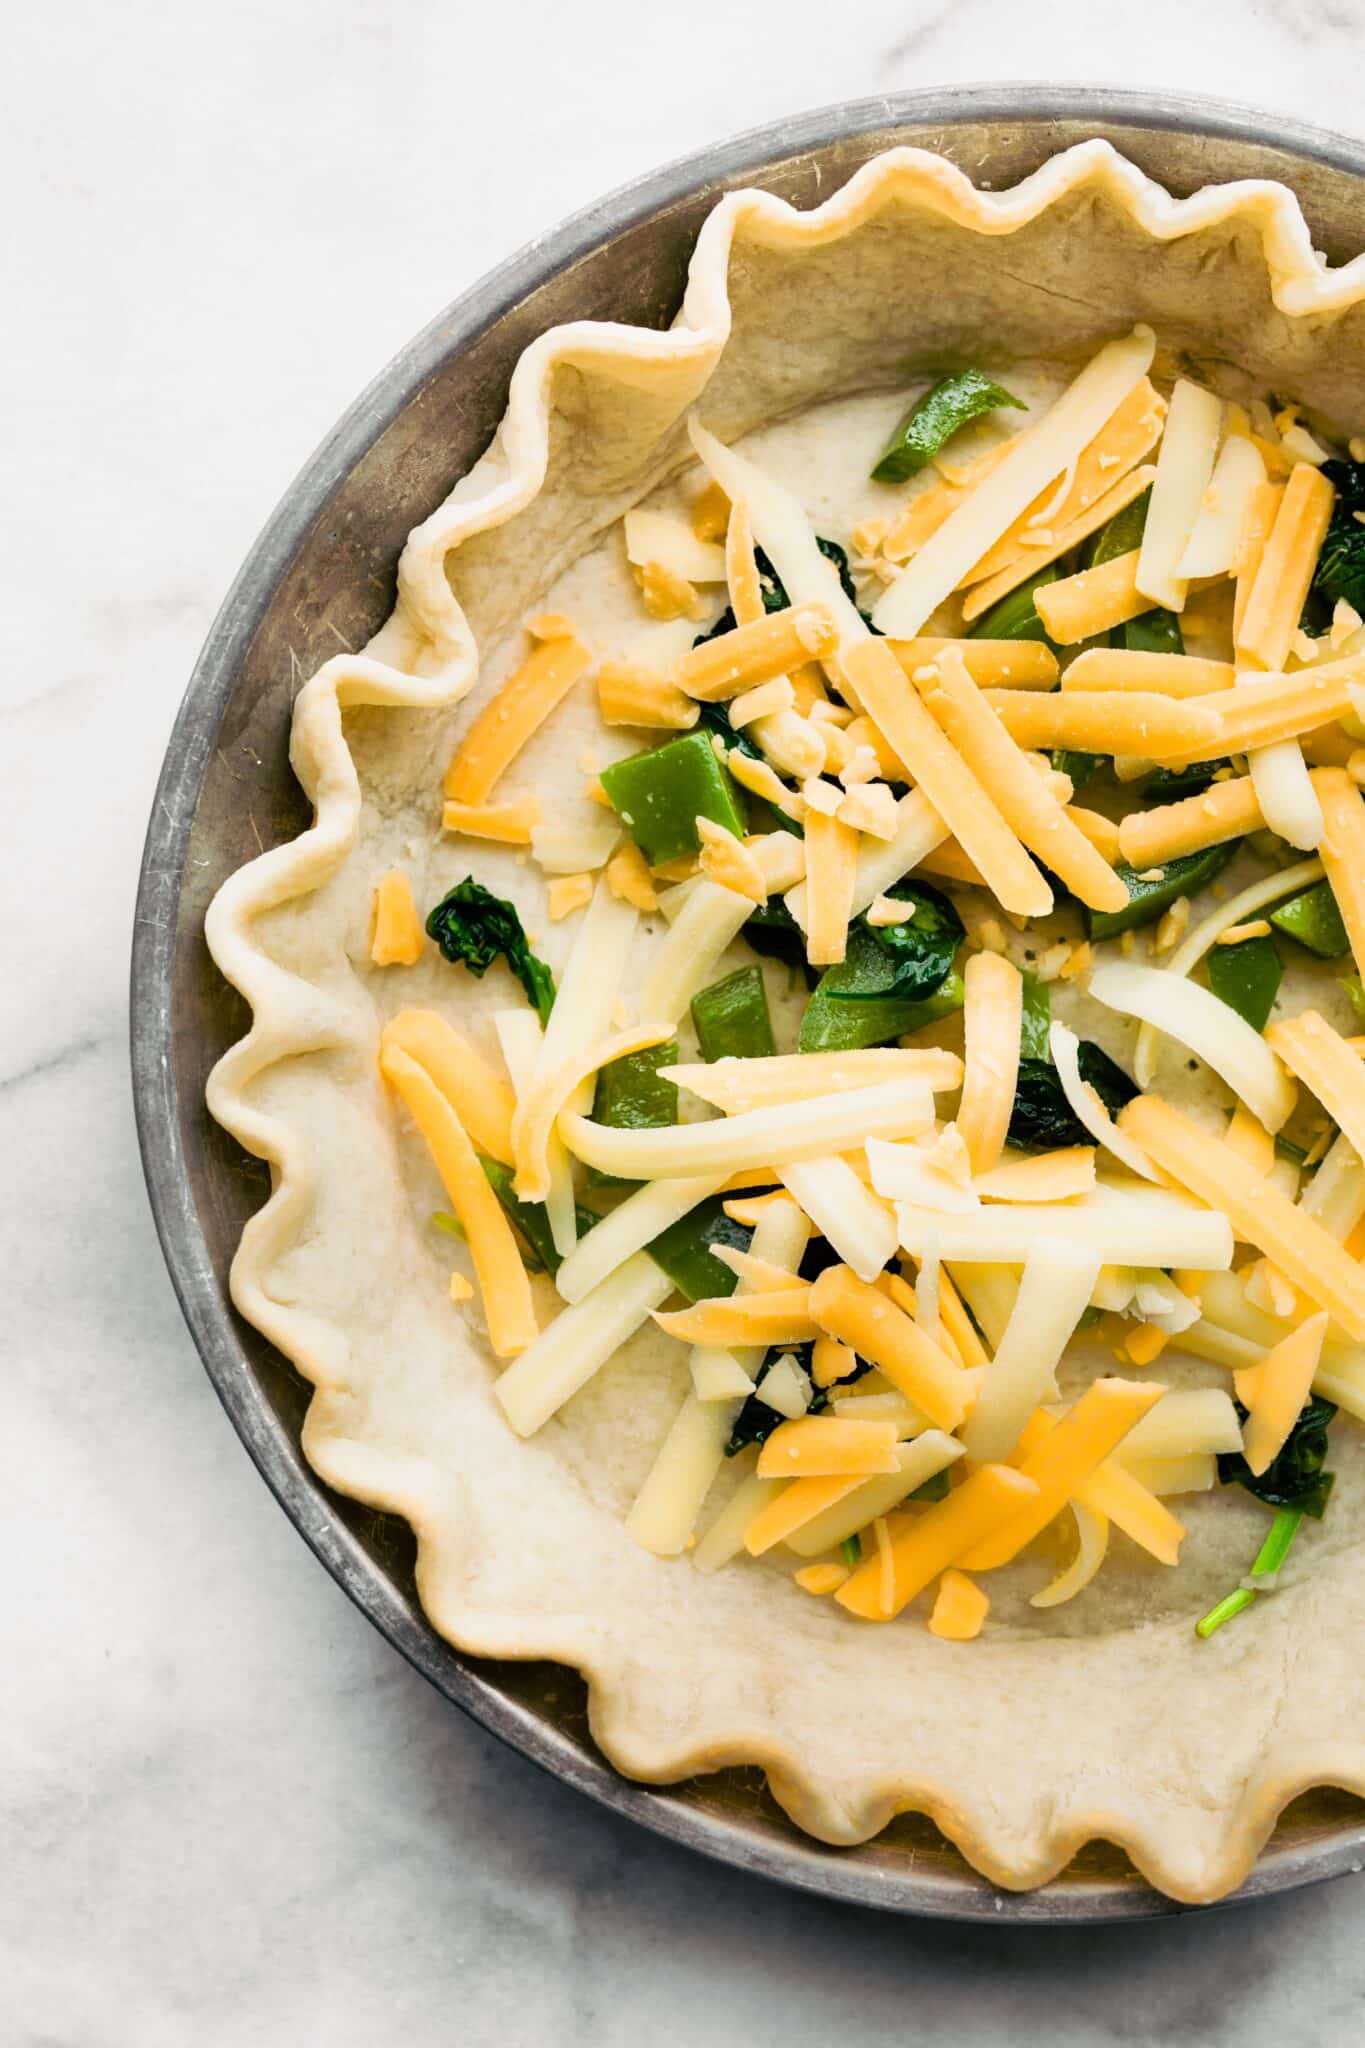 A parbaked pie crust with shredded cheese and vegetables.